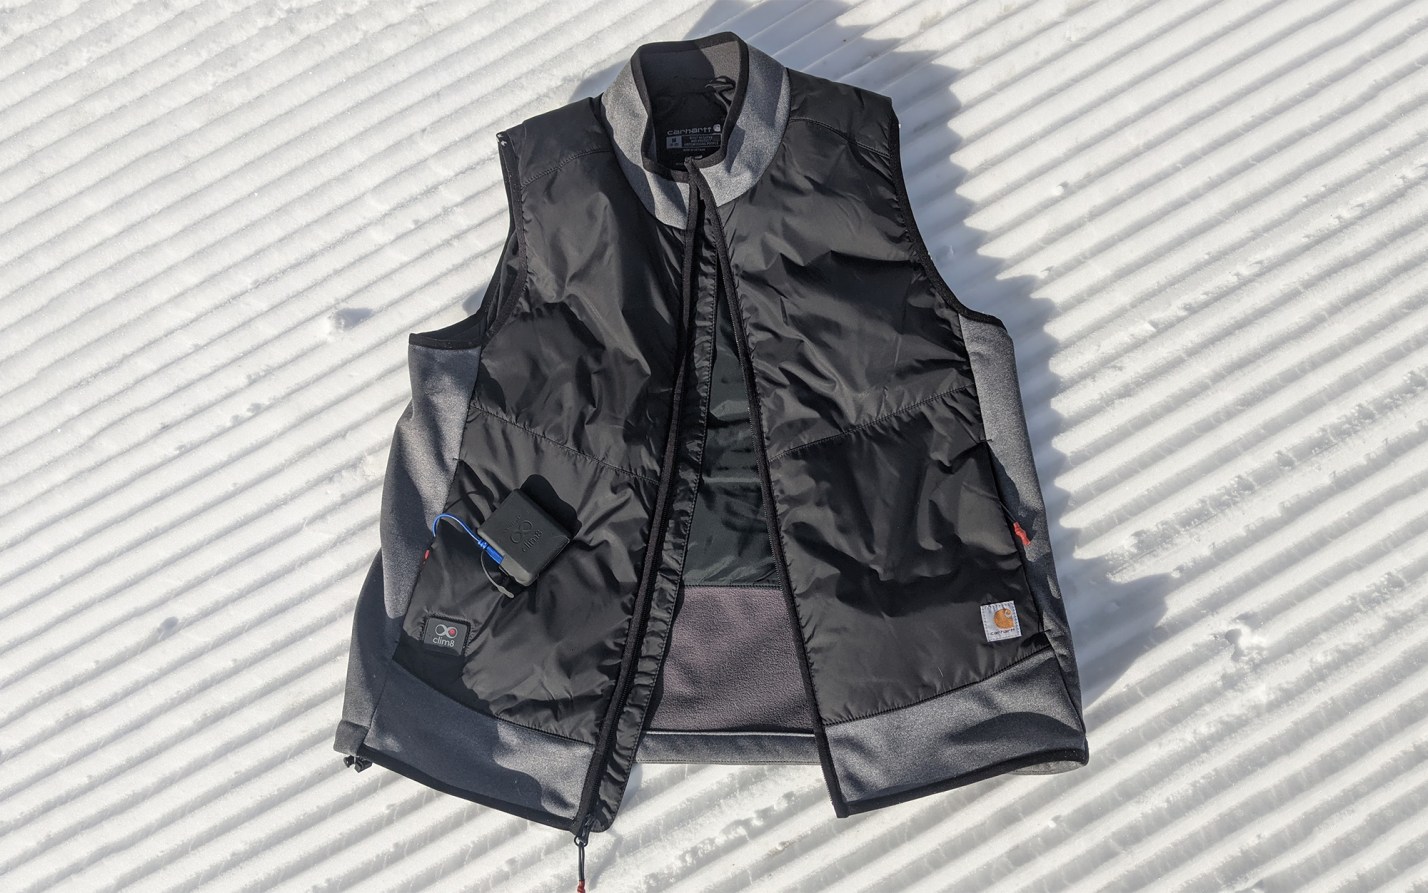 The Carhartt X-1 Smart Heated Vest uses artificial intelligence to keep you warm.